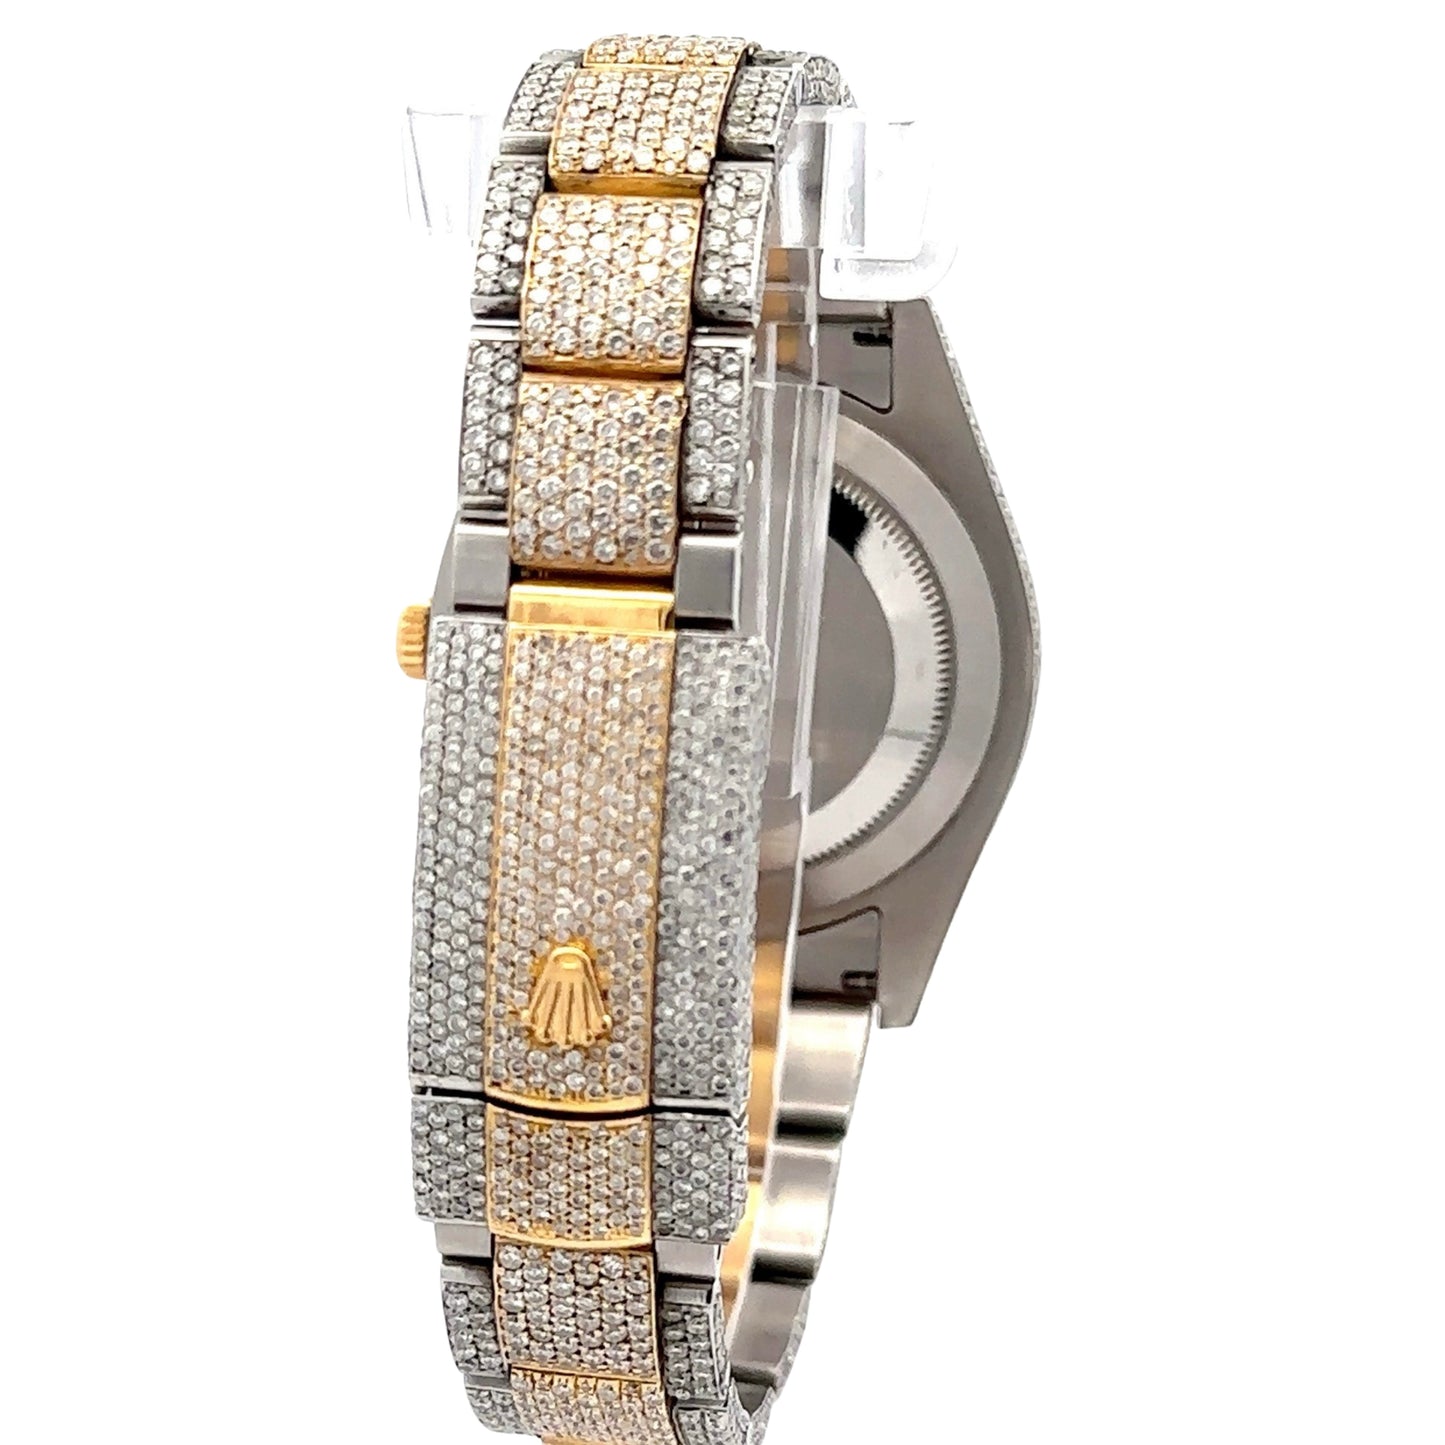 Back of clasp with yellow gold Rolex logo and 18K yellow gold + stainless steel band. Diamonds covering the entire clasp and outside of band